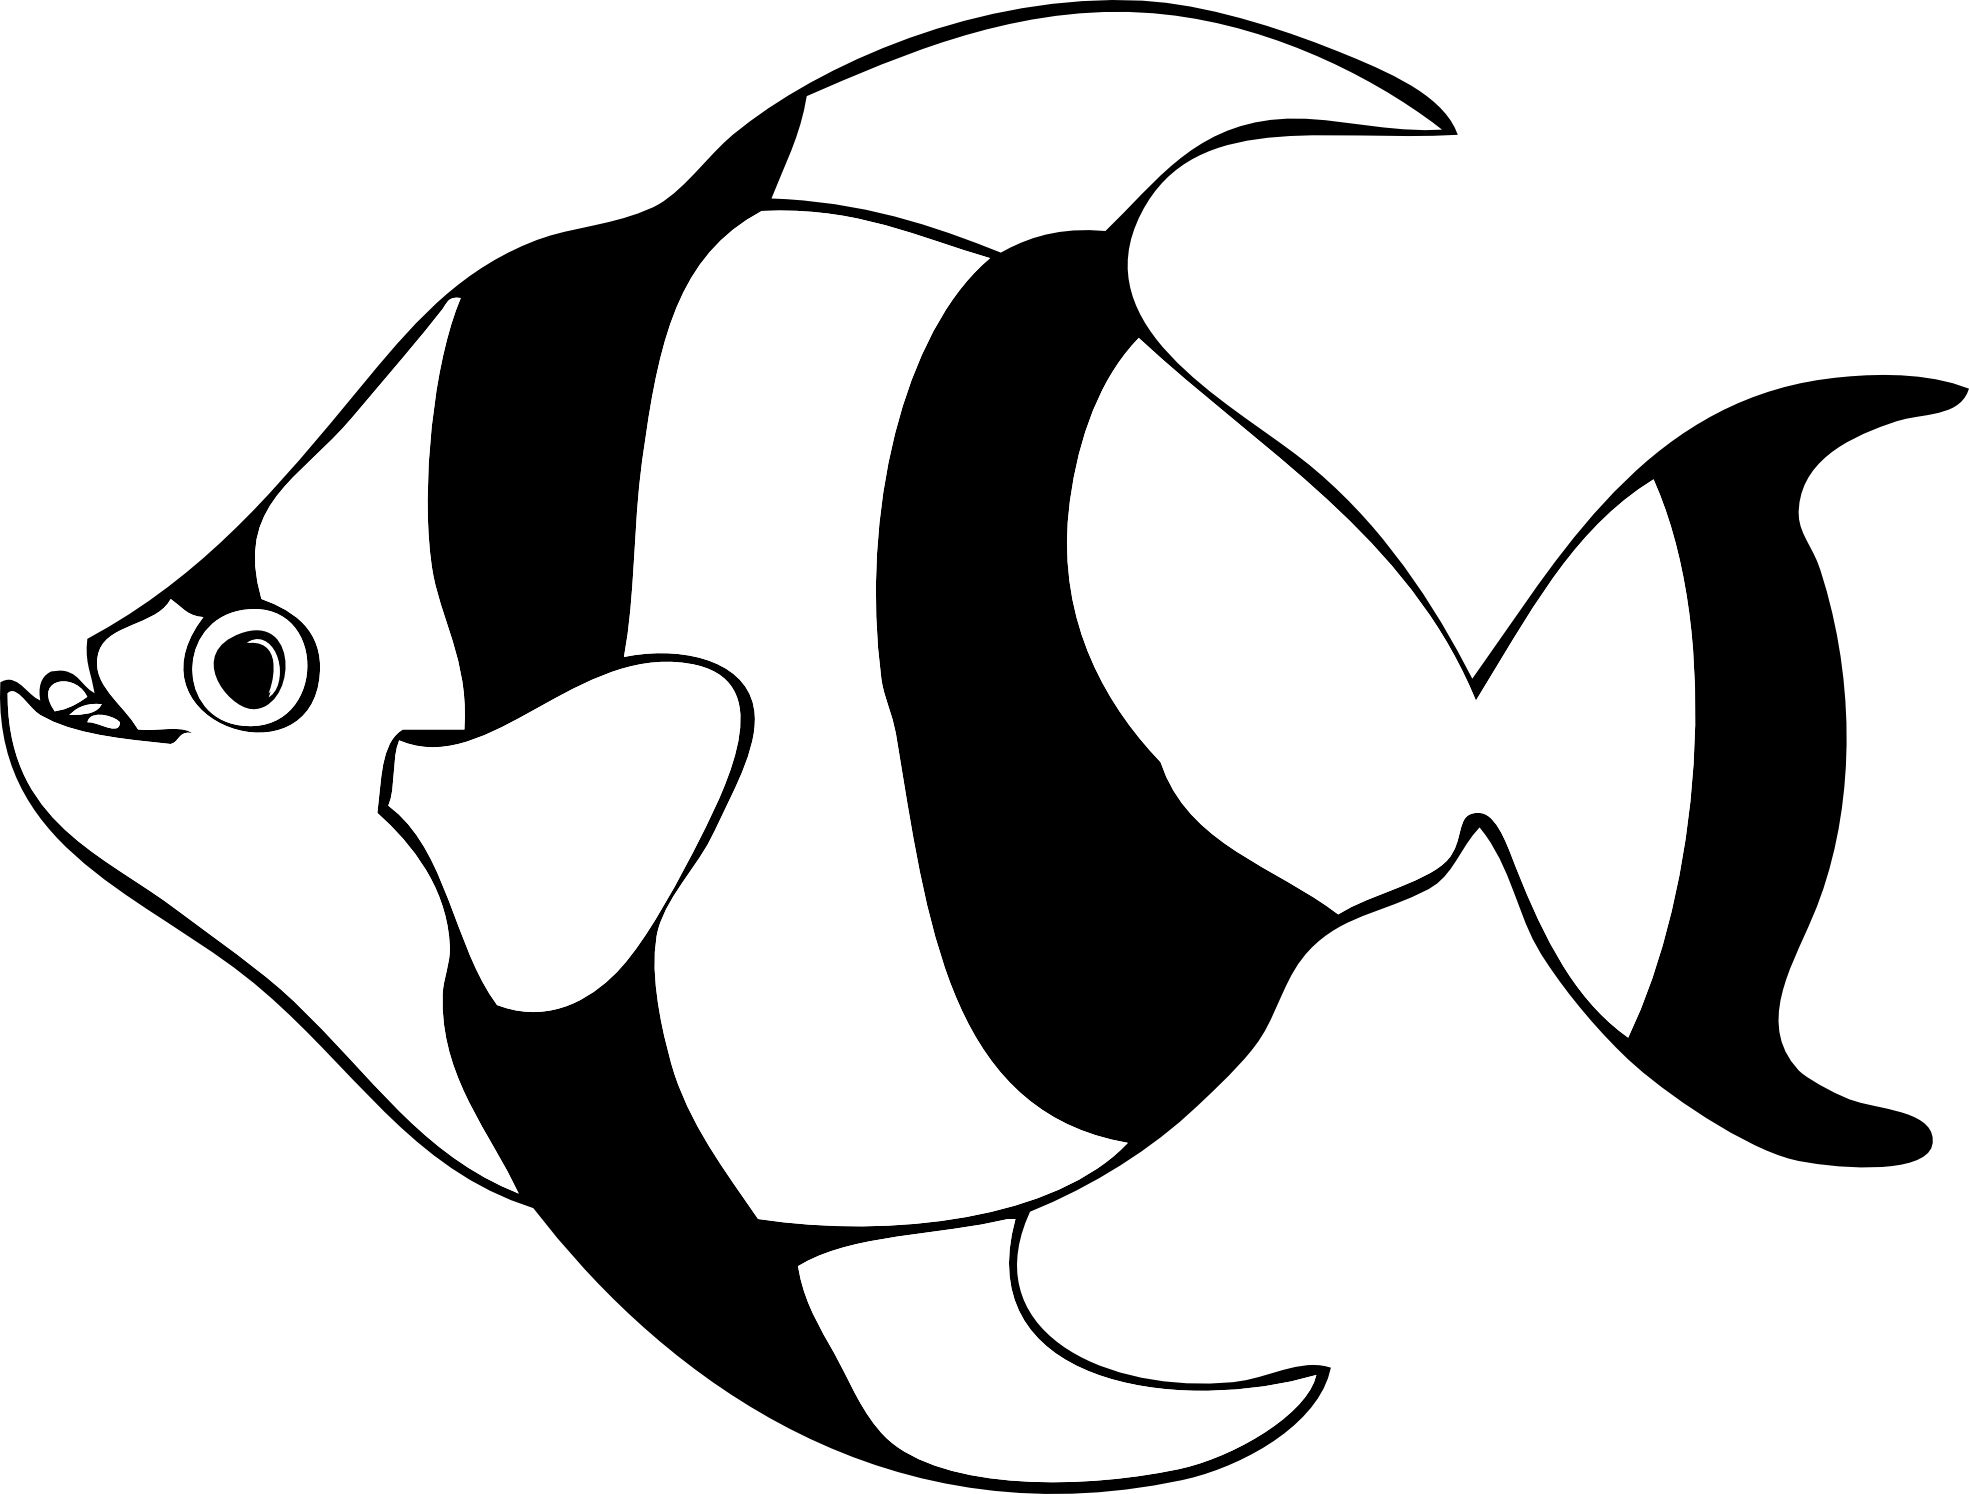 Ocean Black And White Fish Clipart - Ocean Black And White, Transparent background PNG HD thumbnail